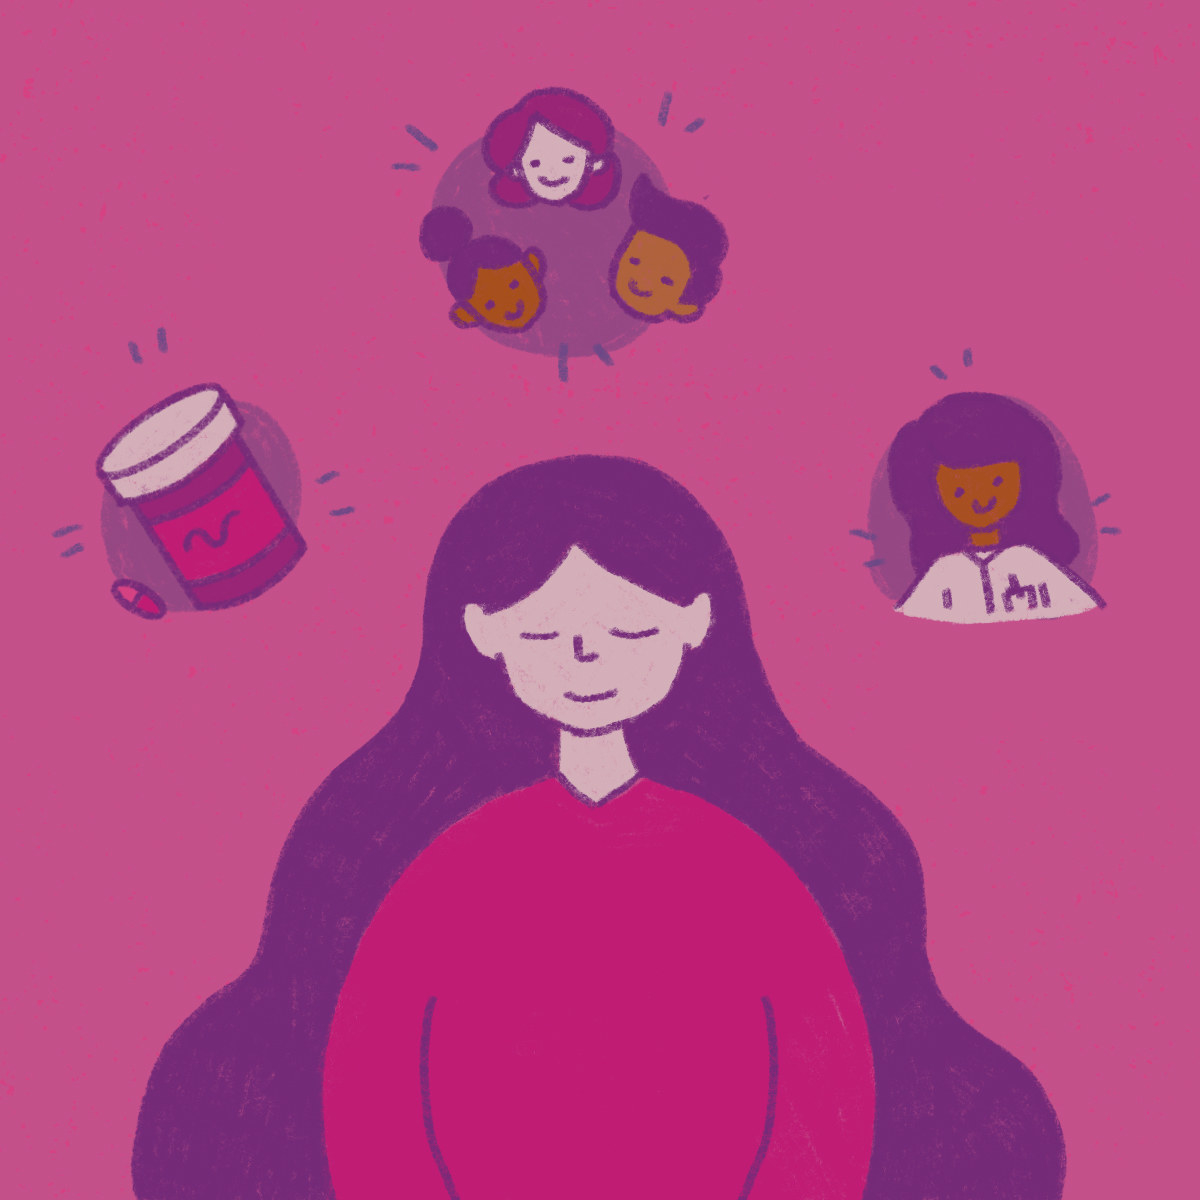 An illustrated image of a young girl with pharmaceutical pills, a doctor, and friends hovering in think boxes above her head